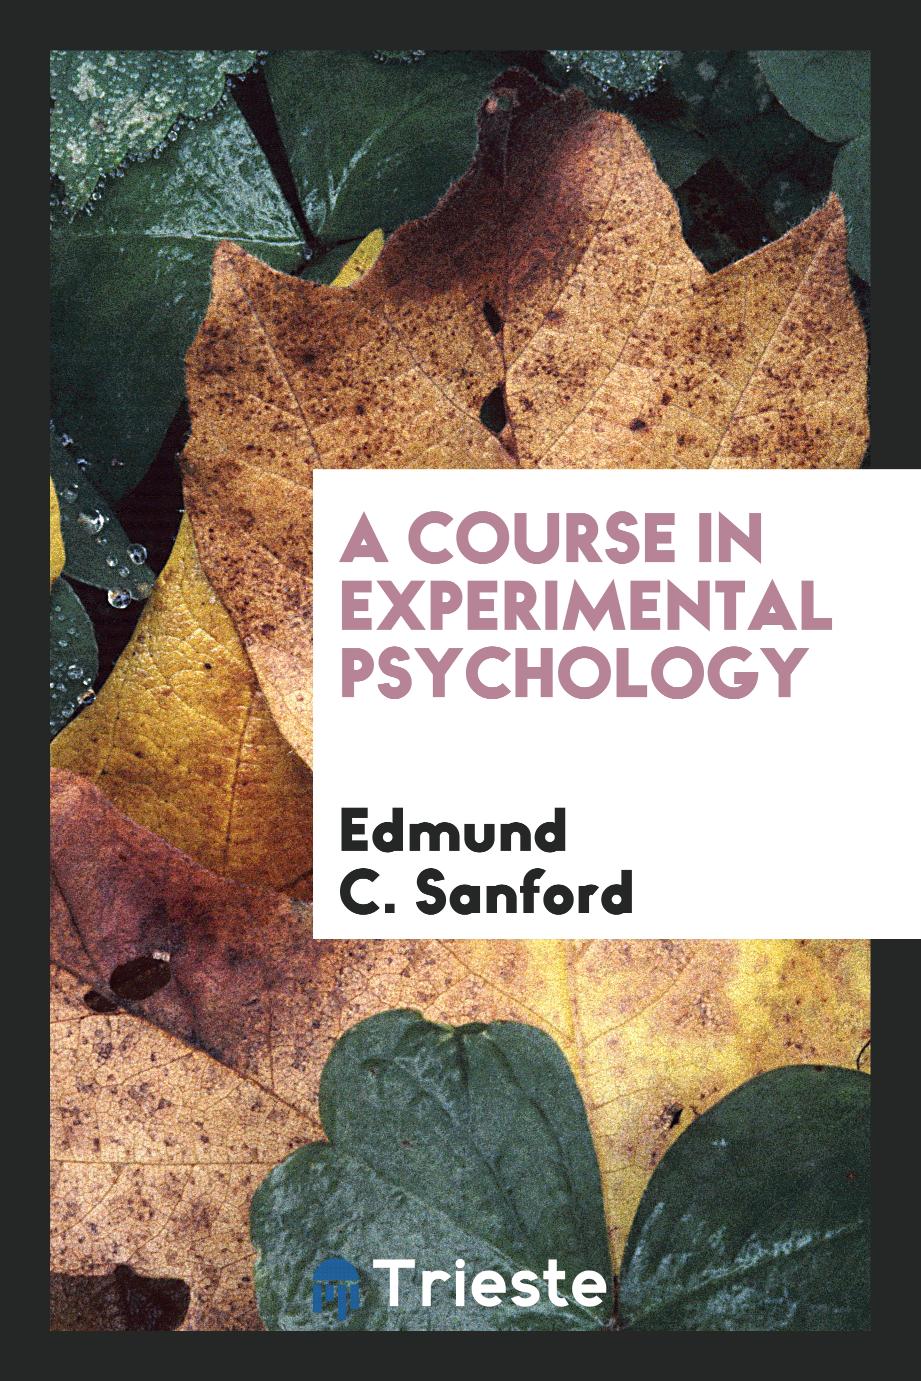 A Course in experimental psychology